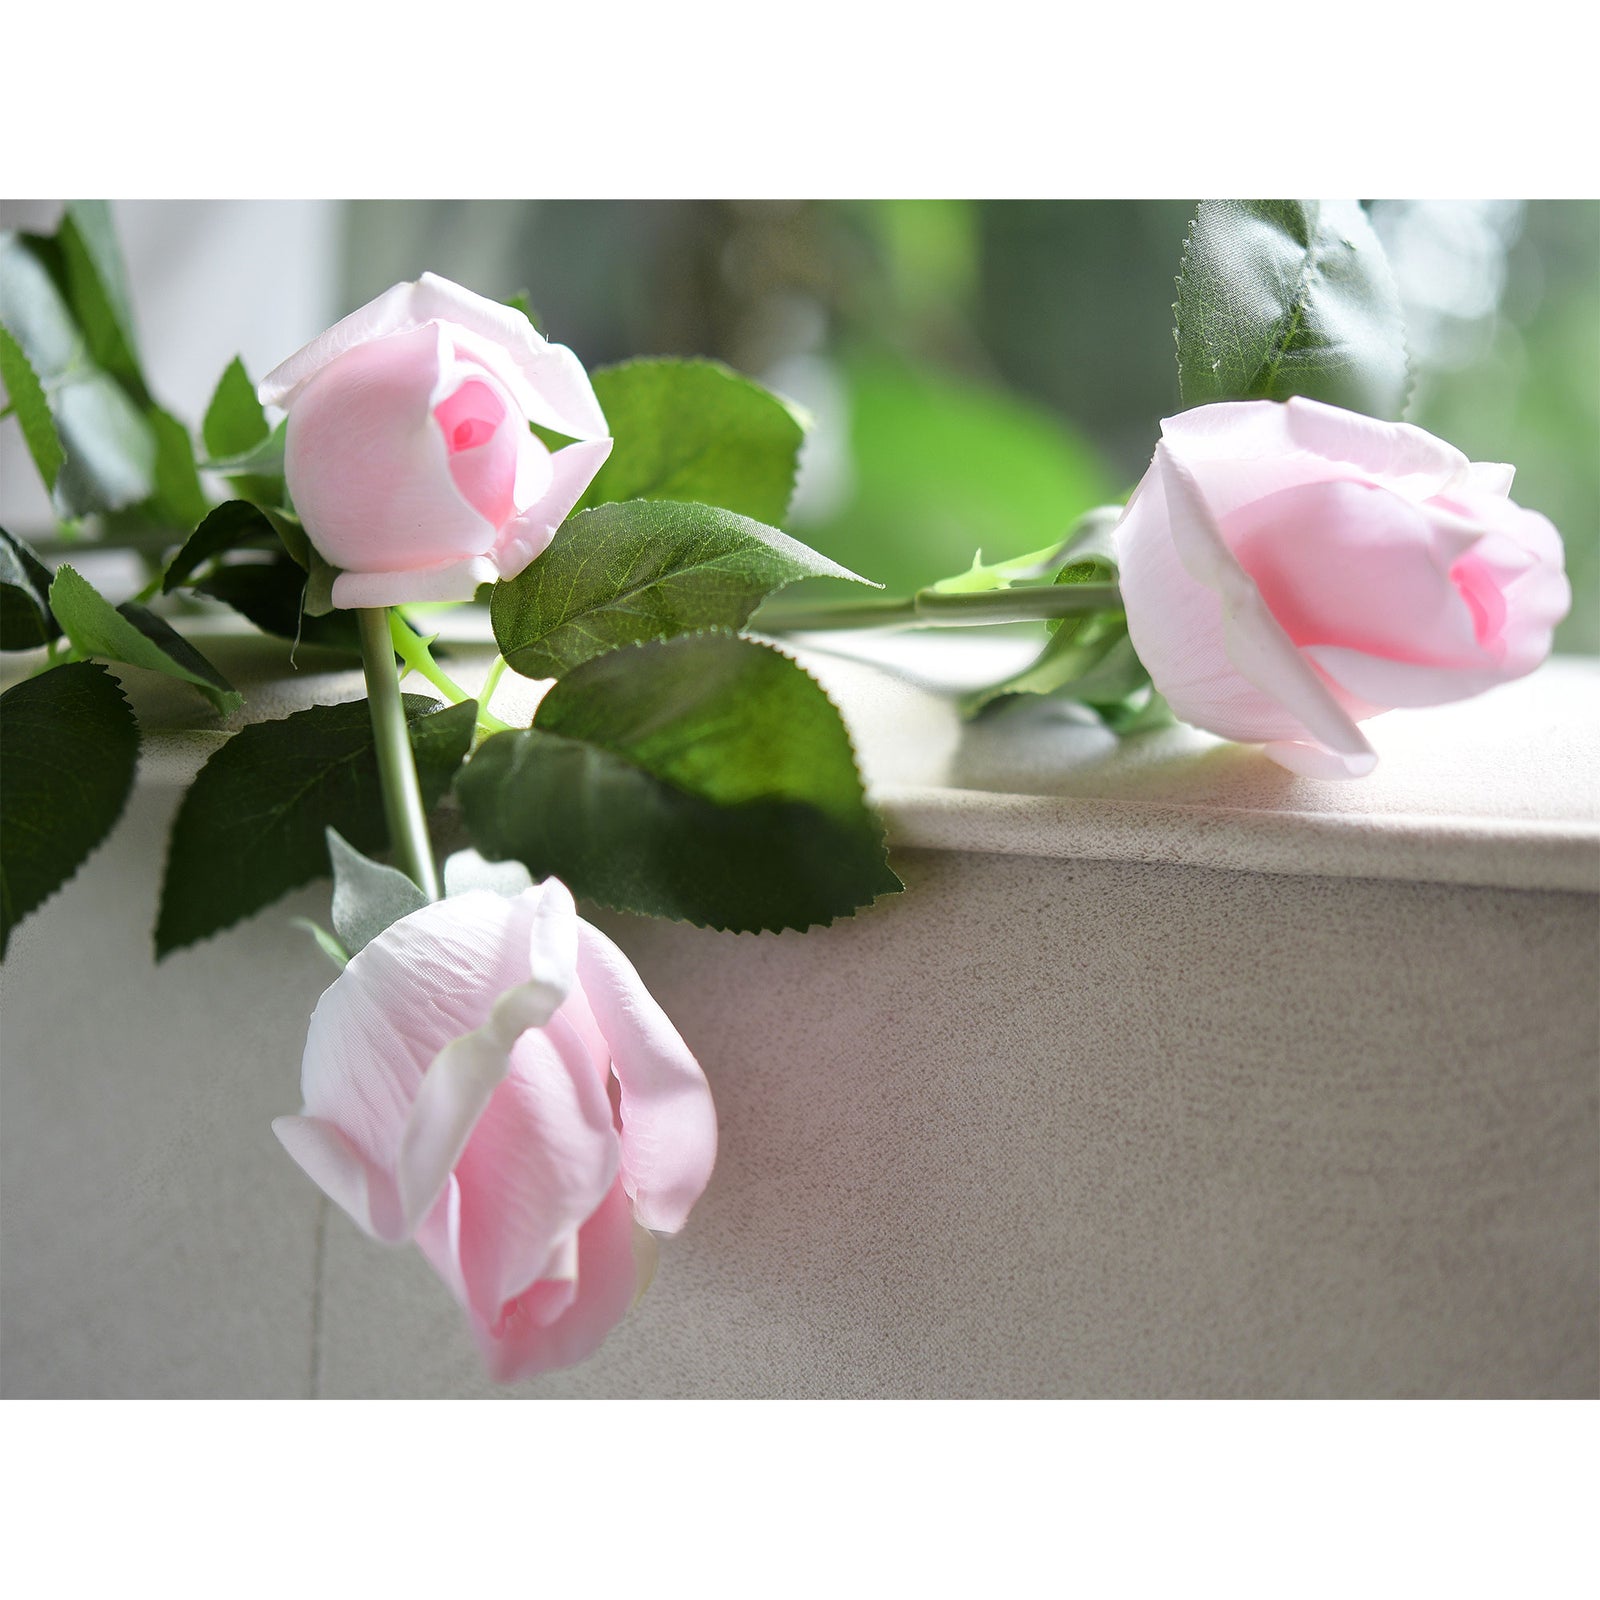 TooGet Flower Petals and Buds Variety Rose 4 Bags Pakistan